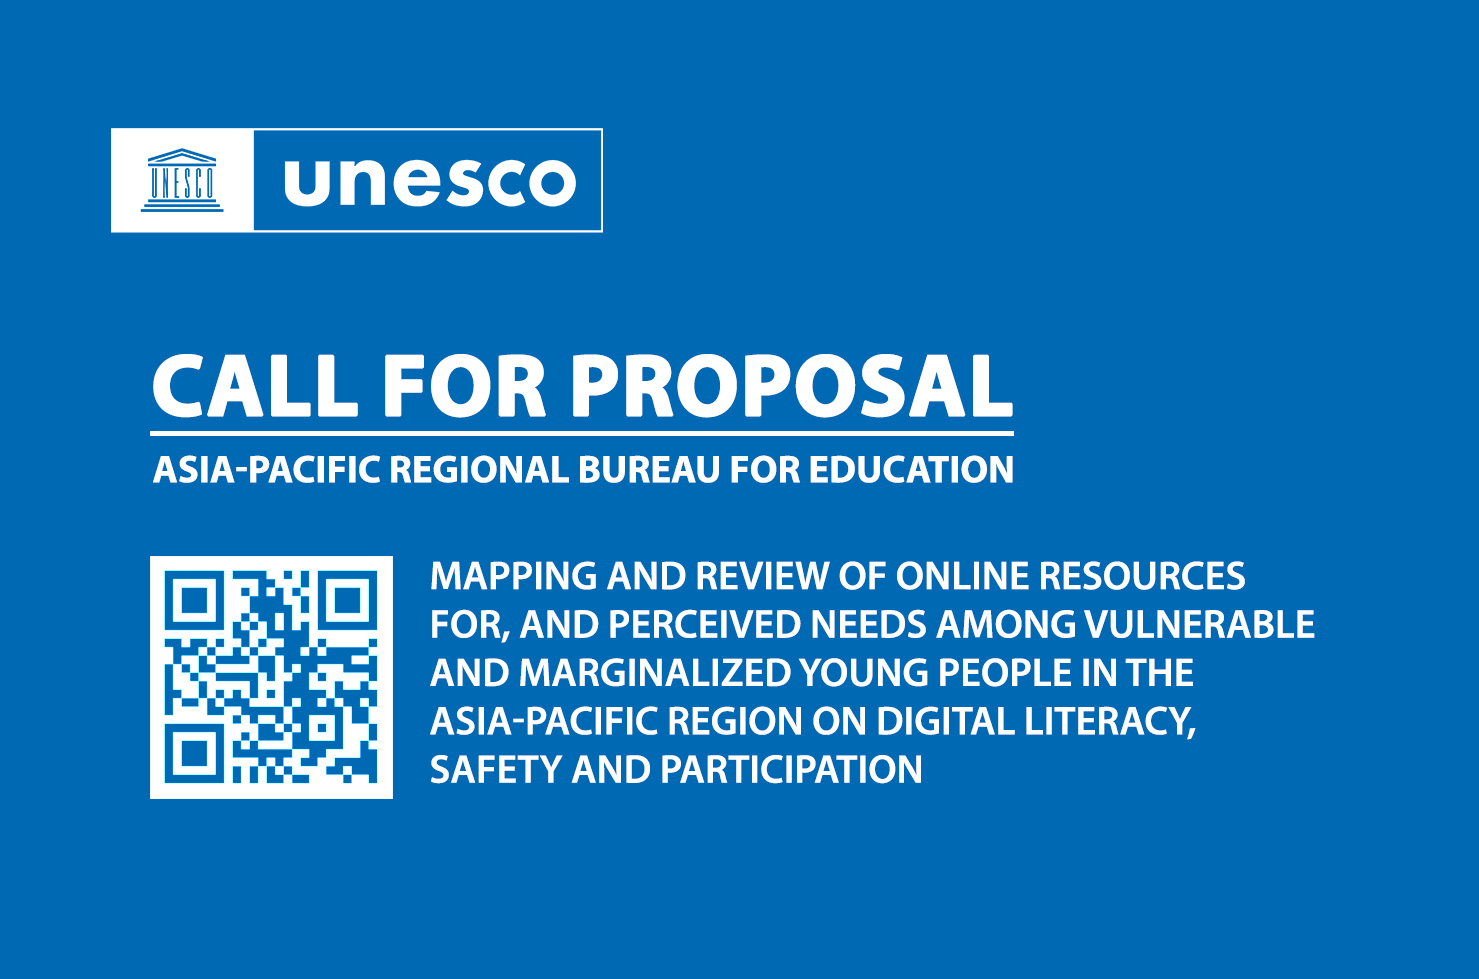 Call for Proposal: Mapping and review of online resources for, and perceived needs among vulnerable and marginalized young people in the Asia-Pacific